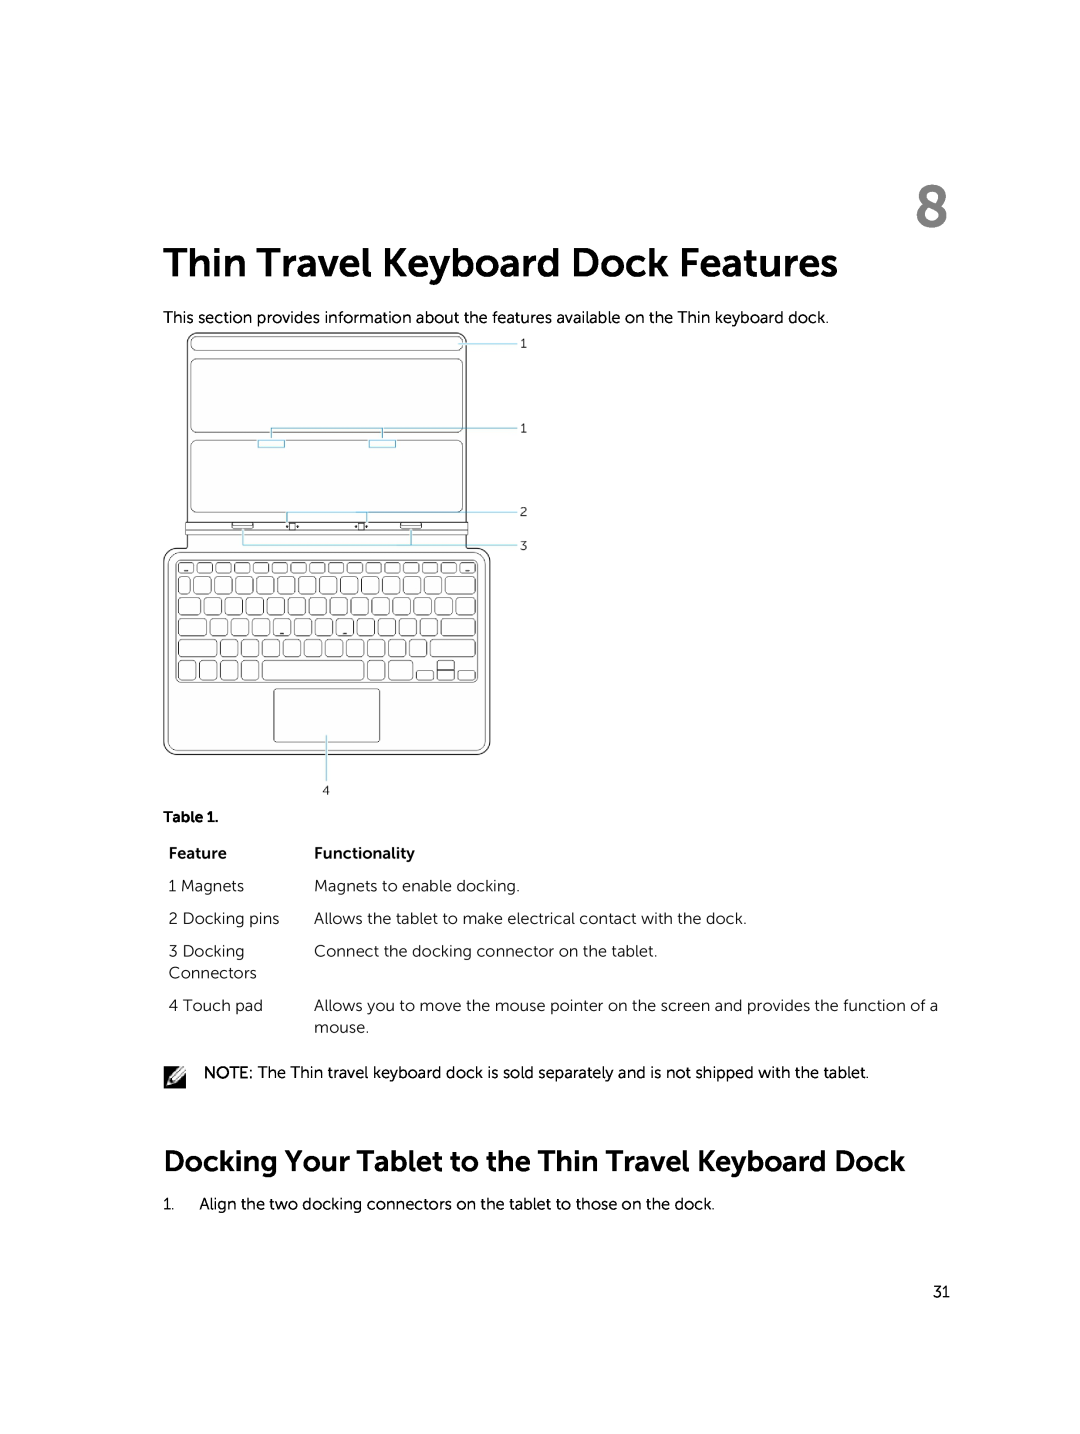 Dell T06G manual Thin Travel Keyboard Dock Features, Docking Your Tablet to the Thin Travel Keyboard Dock 